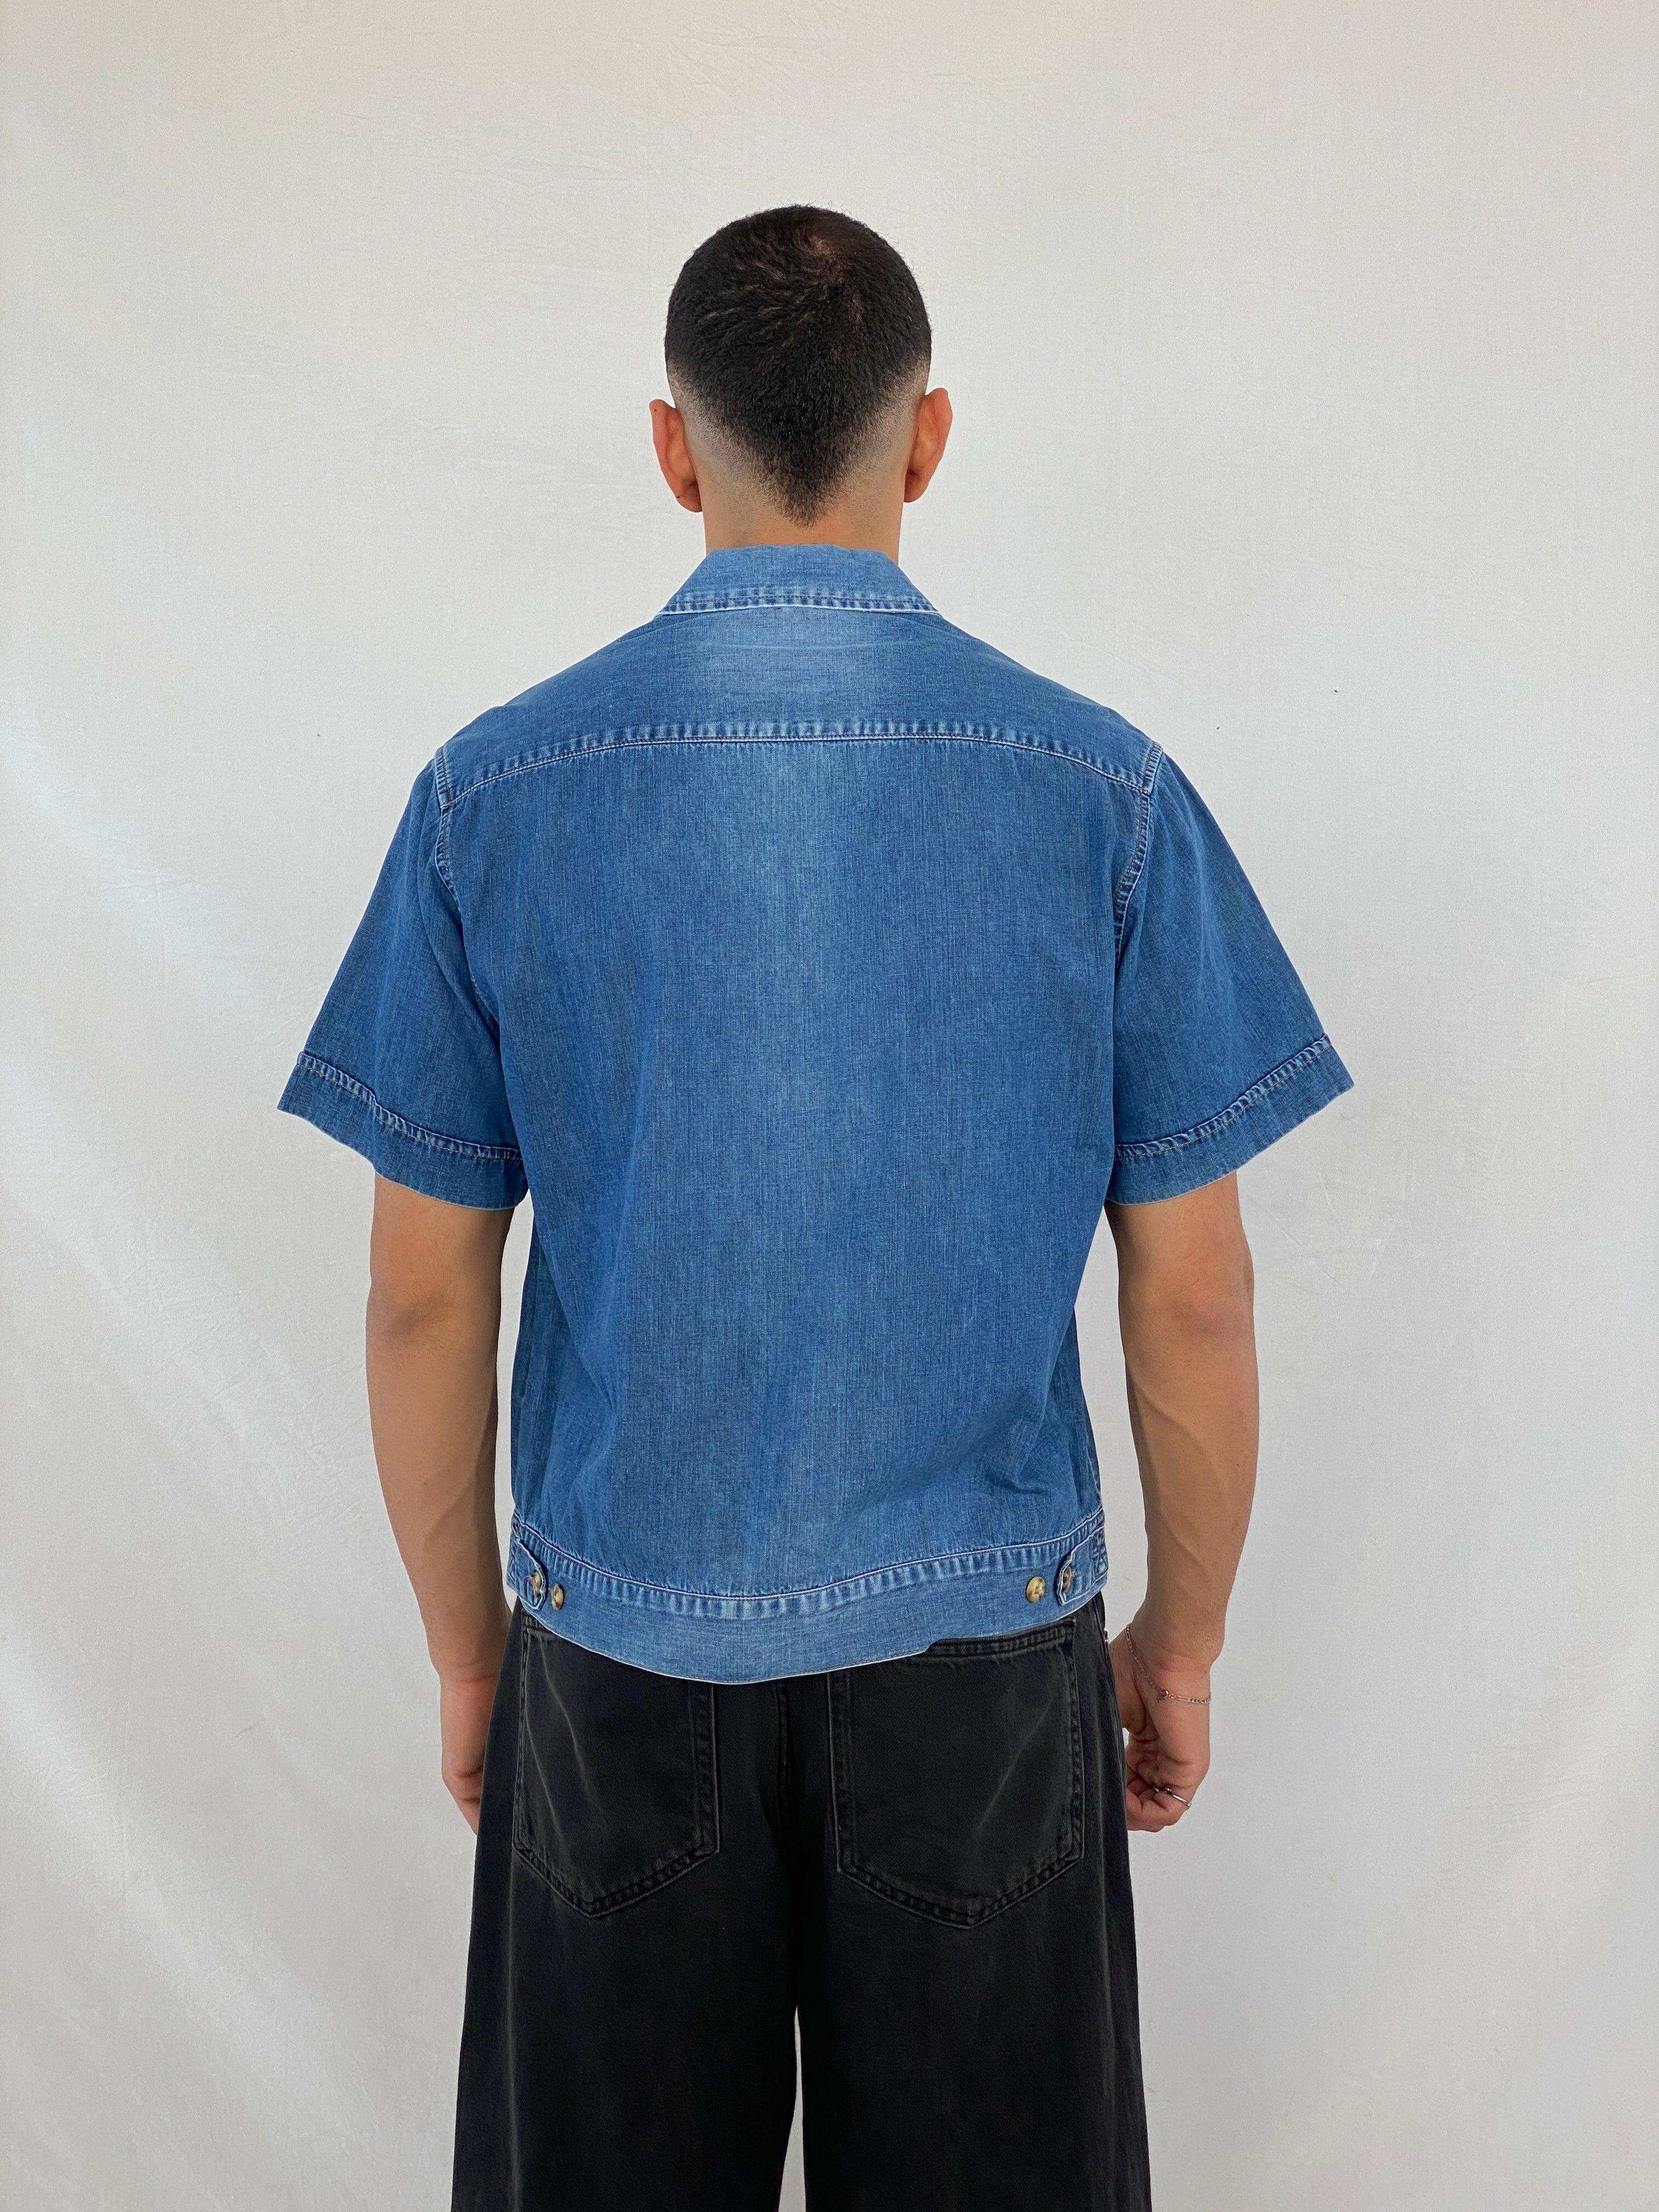 Vintage 90s Guess Jeans Half-Sleeve Denim Shirt - Balagan Vintage Half Sleeve Shirt 90s, Abdullah, guess, NEW IN